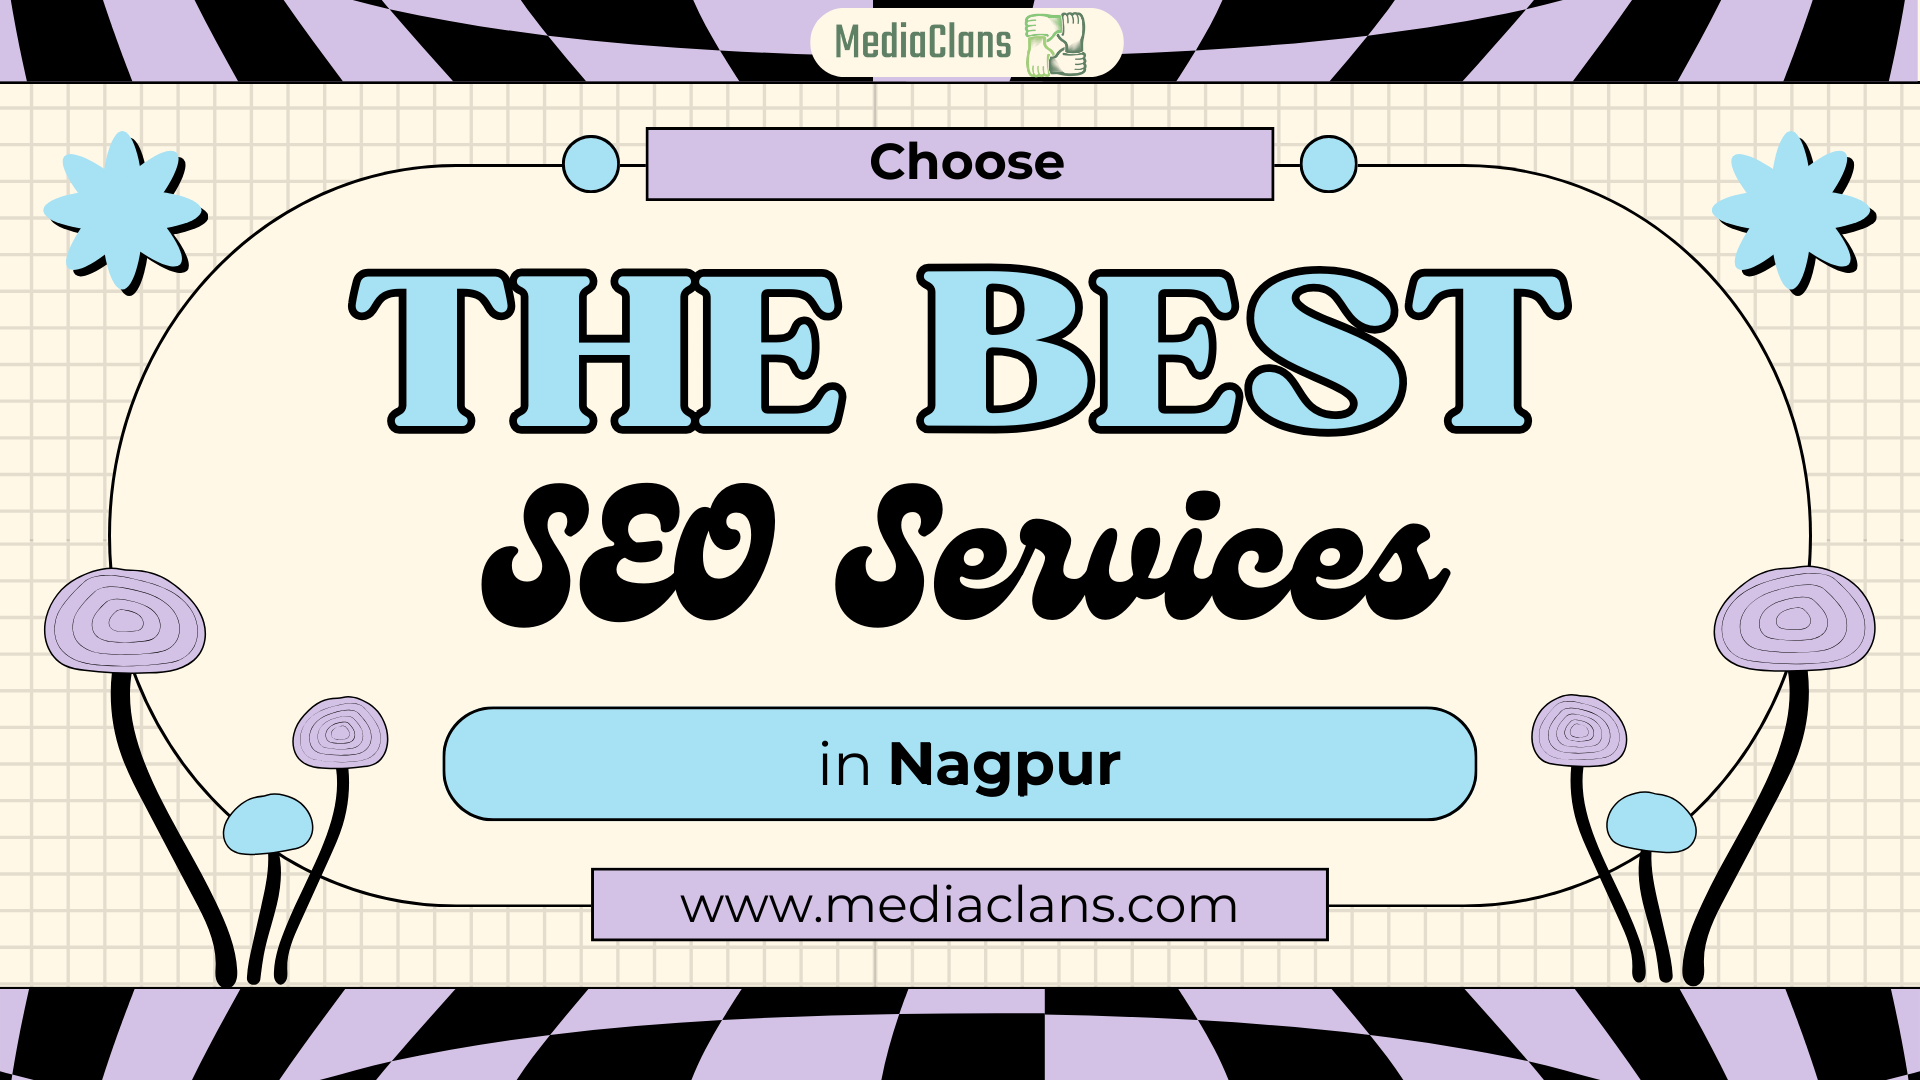 The best seo services in Nagpur